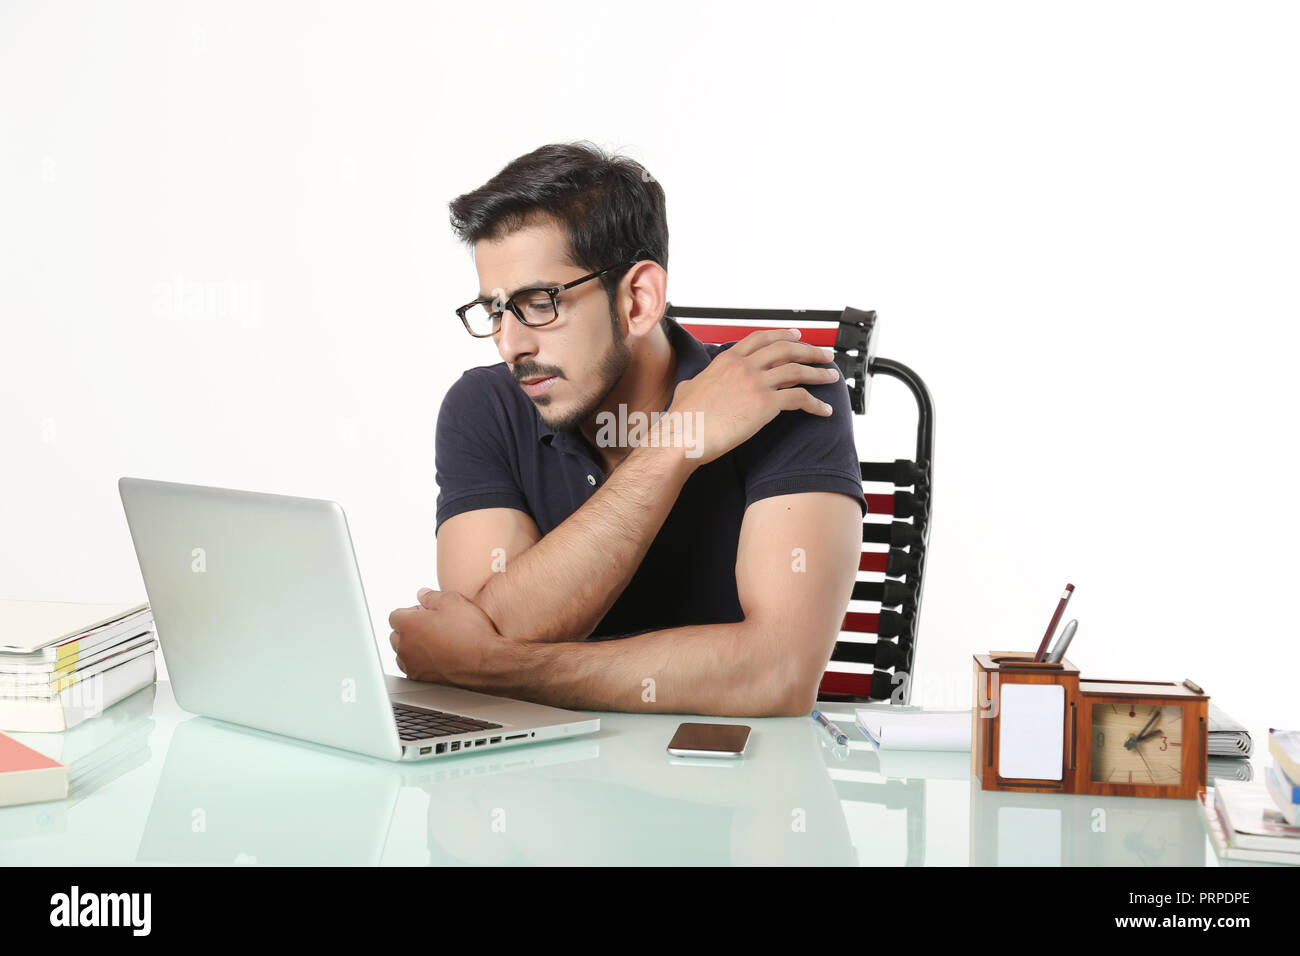 Man is looking work in laptop with wearing black glasses. isolated on white background. Stock Photo